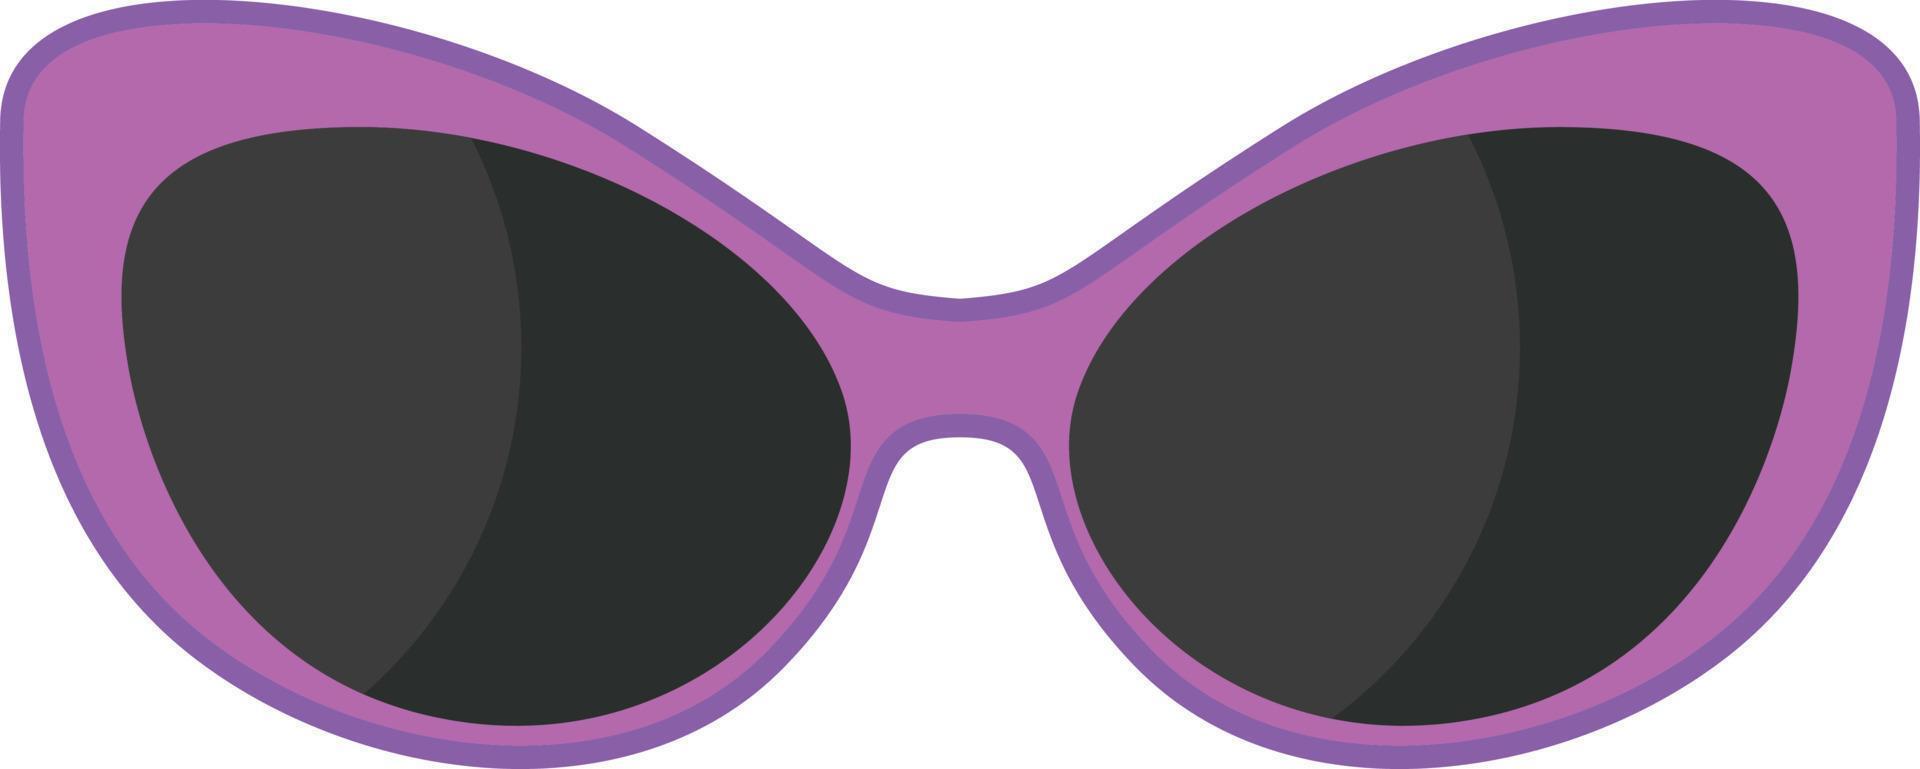 Summer purple sunglasses isolated in seamless vector